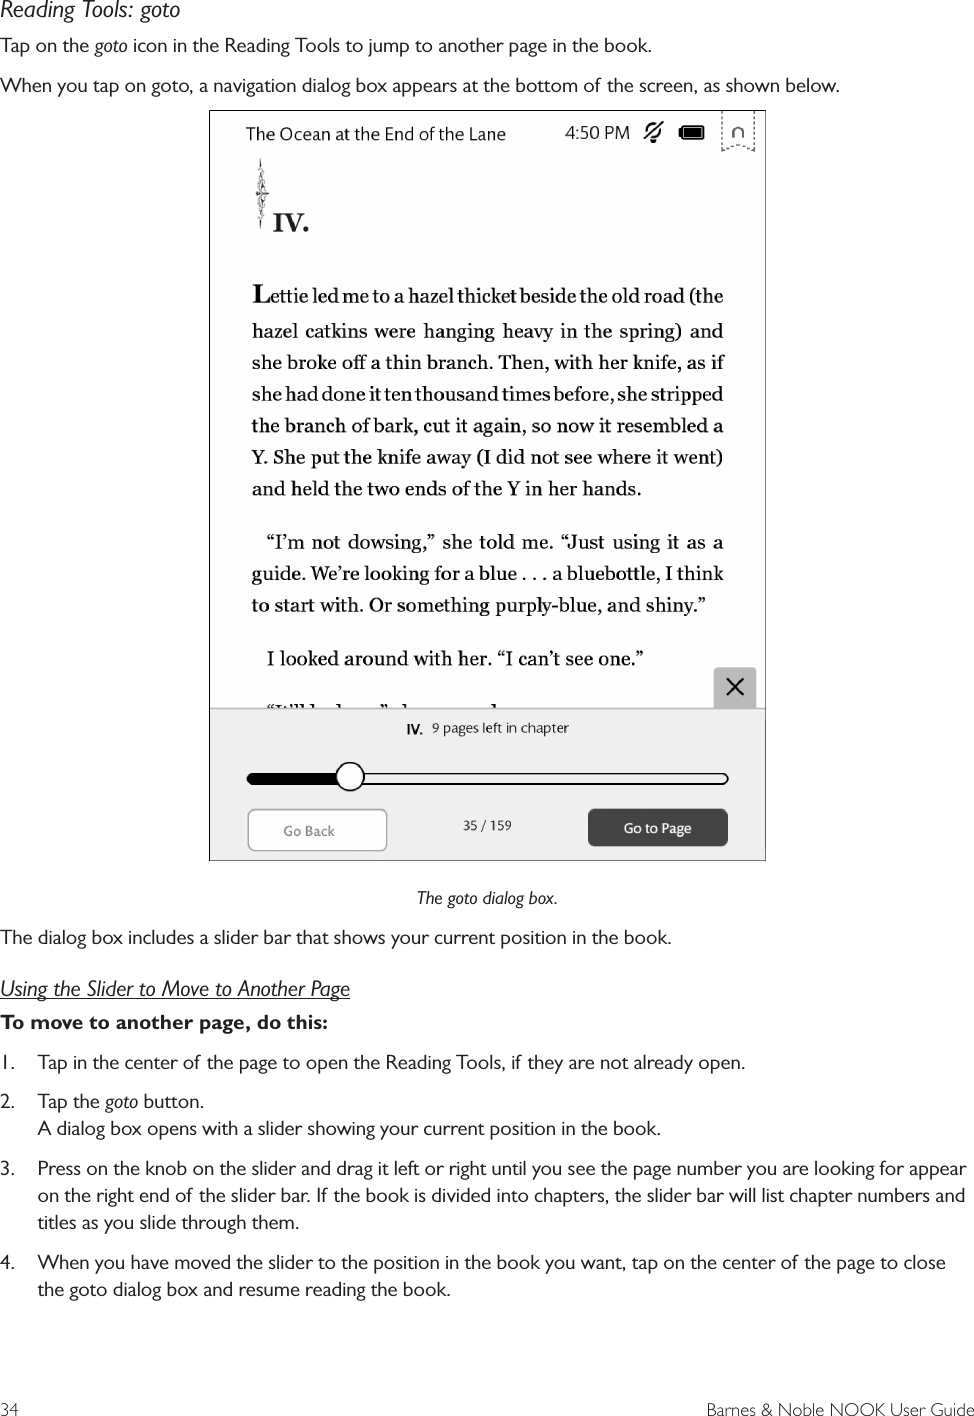 34  Barnes &amp; Noble NOOK User GuideReading Tools: gotoTap on the goto icon in the Reading Tools to jump to another page in the book.When you tap on goto, a navigation dialog box appears at the bottom of the screen, as shown below.The goto dialog box.The dialog box includes a slider bar that shows your current position in the book. Using the Slider to Move to Another PageTo move to another page, do this:1. Tap in the center of the page to open the Reading Tools, if they are not already open.2. Tap the goto button.A dialog box opens with a slider showing your current position in the book.3. Press on the knob on the slider and drag it left or right until you see the page number you are looking for appearon the right end of the slider bar. If the book is divided into chapters, the slider bar will list chapter numbers andtitles as you slide through them.4. When you have moved the slider to the position in the book you want, tap on the center of the page to closethe goto dialog box and resume reading the book.